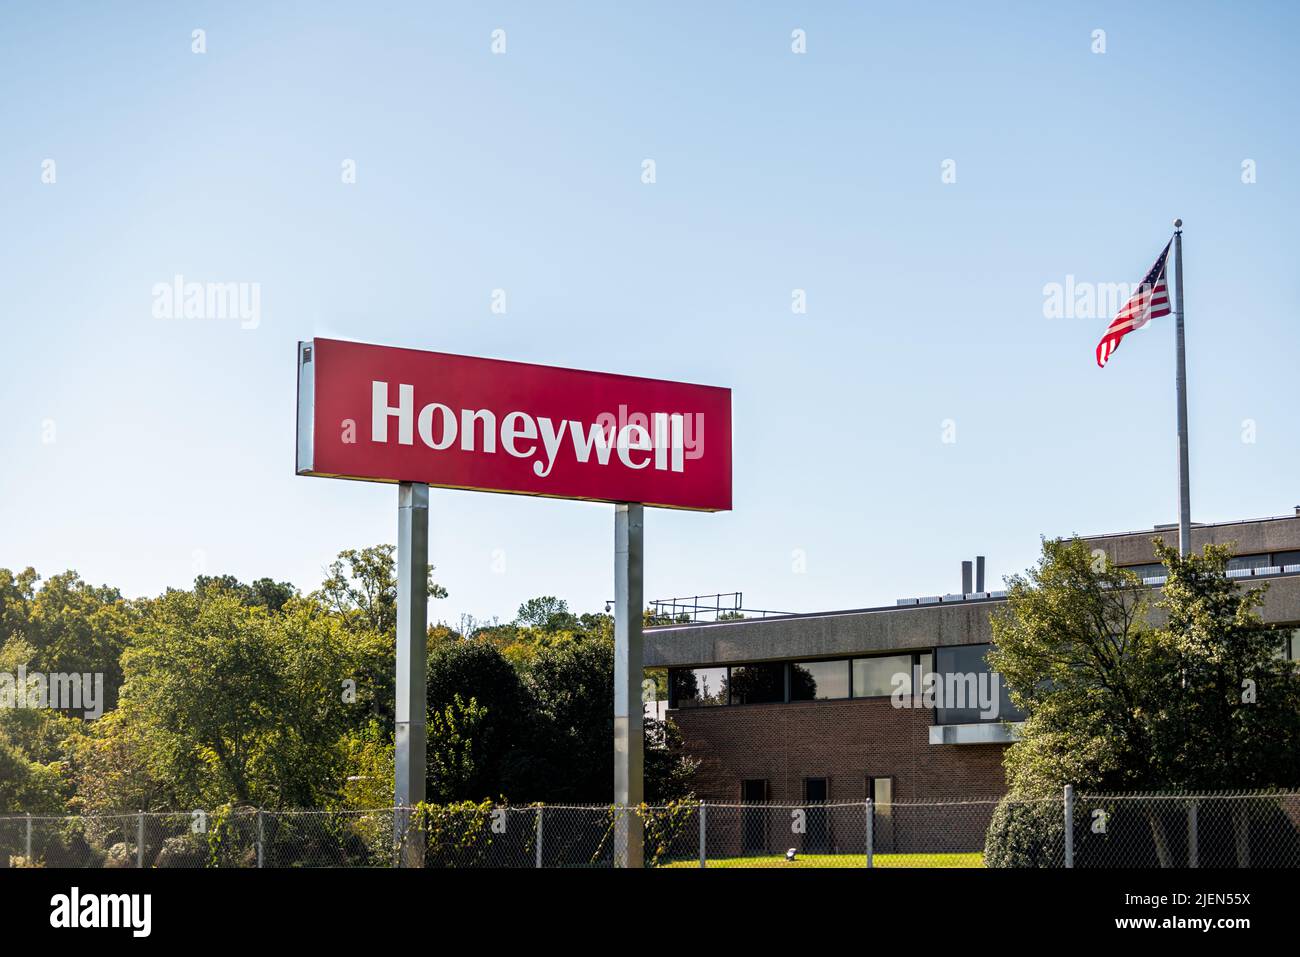 Colonial Heights, USA - October 18, 2021: Honeywell International Inc Manufacturer company office building entrance sign with american flag on pole fl Stock Photo